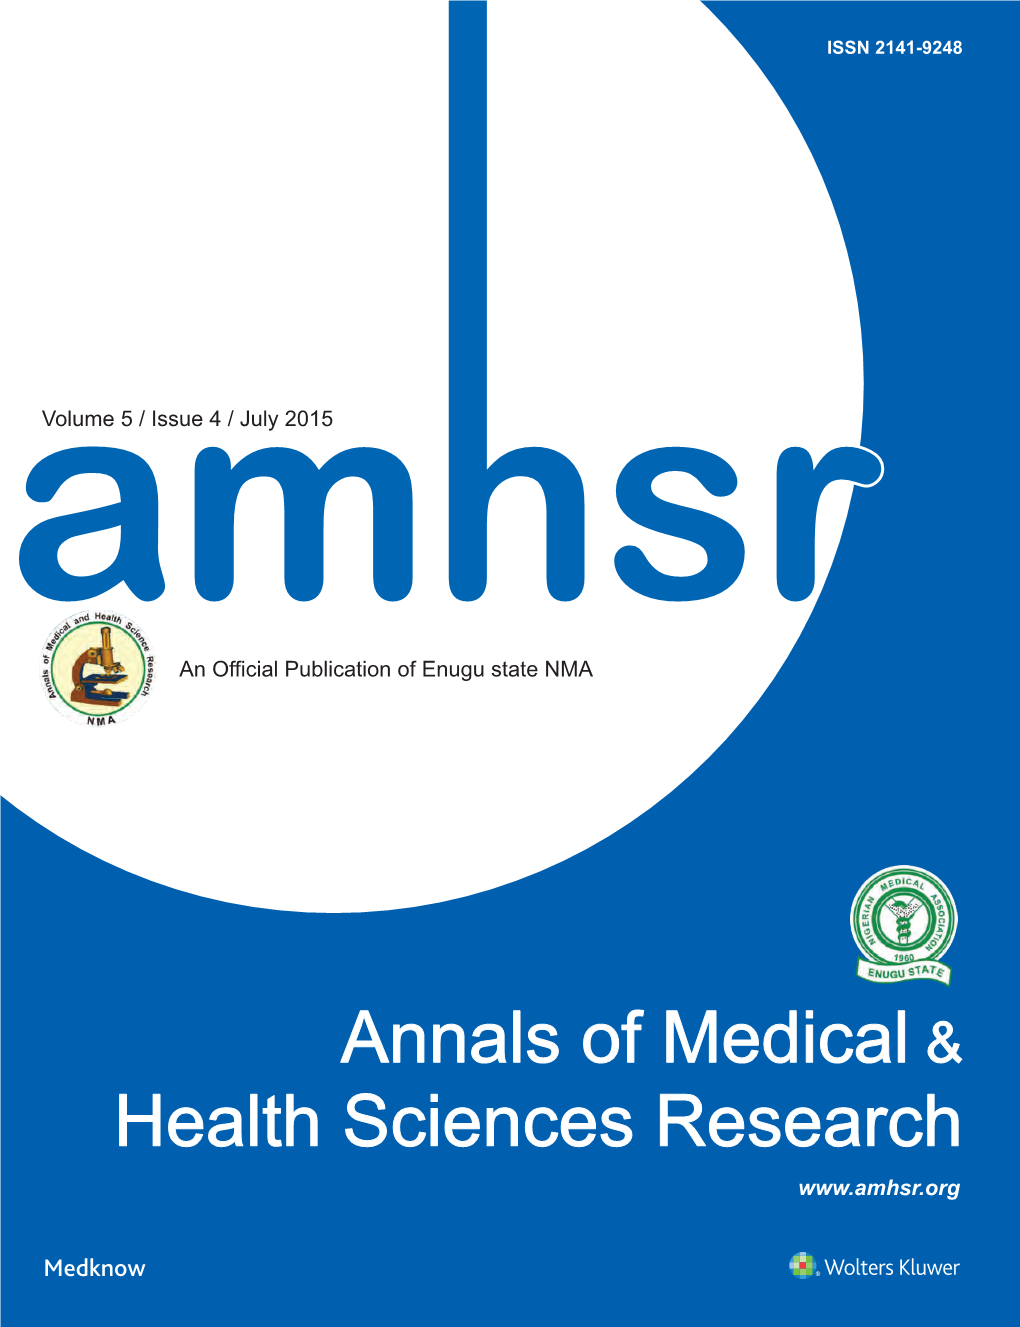 Annals of Medical & Health Sciences Research